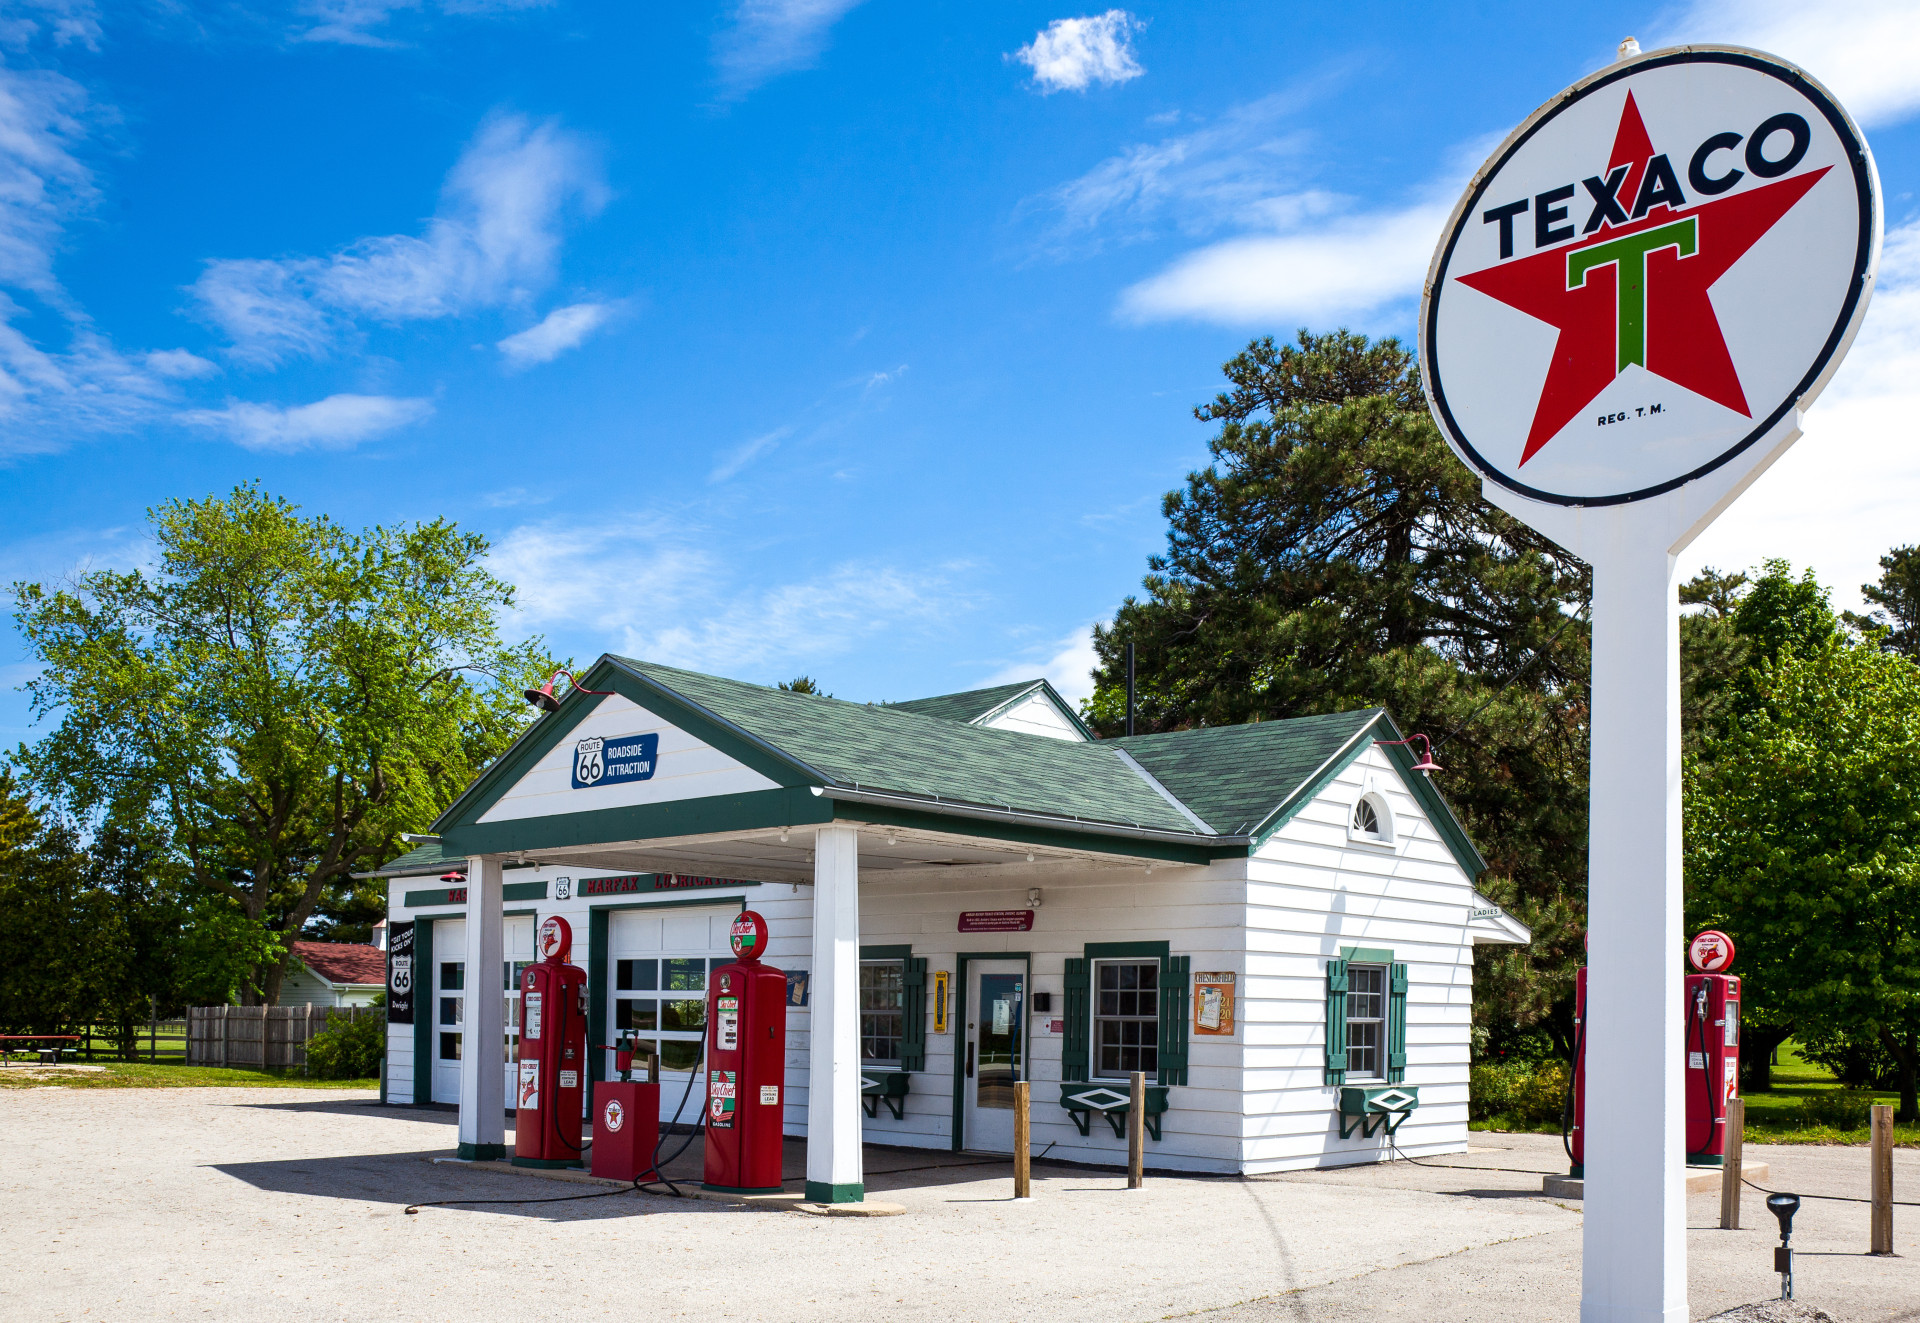 The old Texaco gas station, in Dwight.